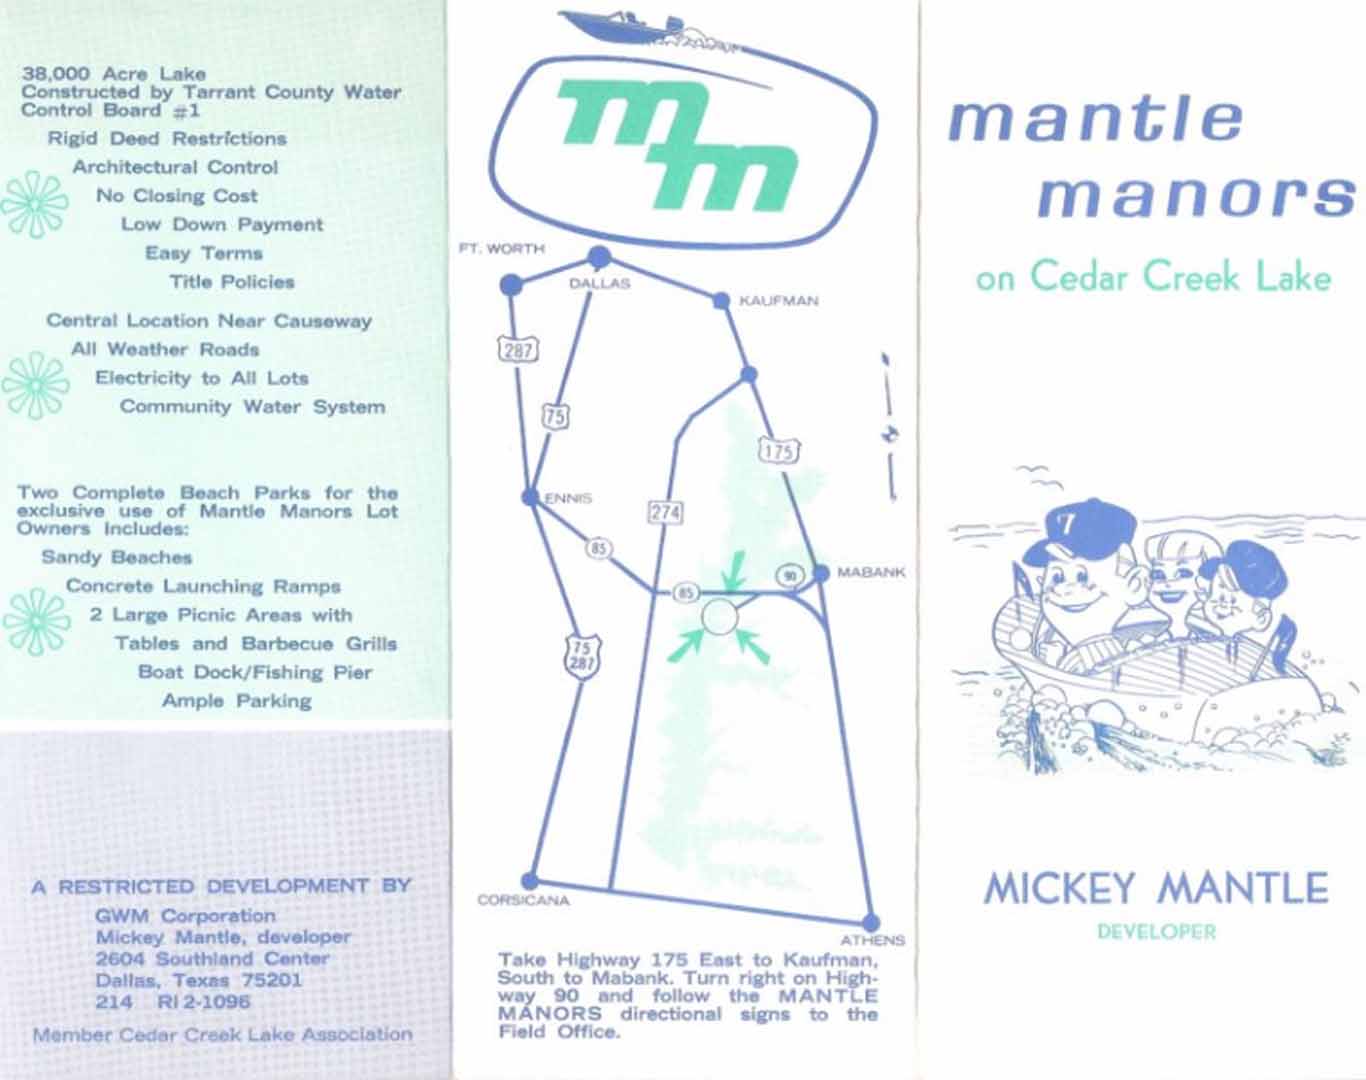 1969 mantle manors september